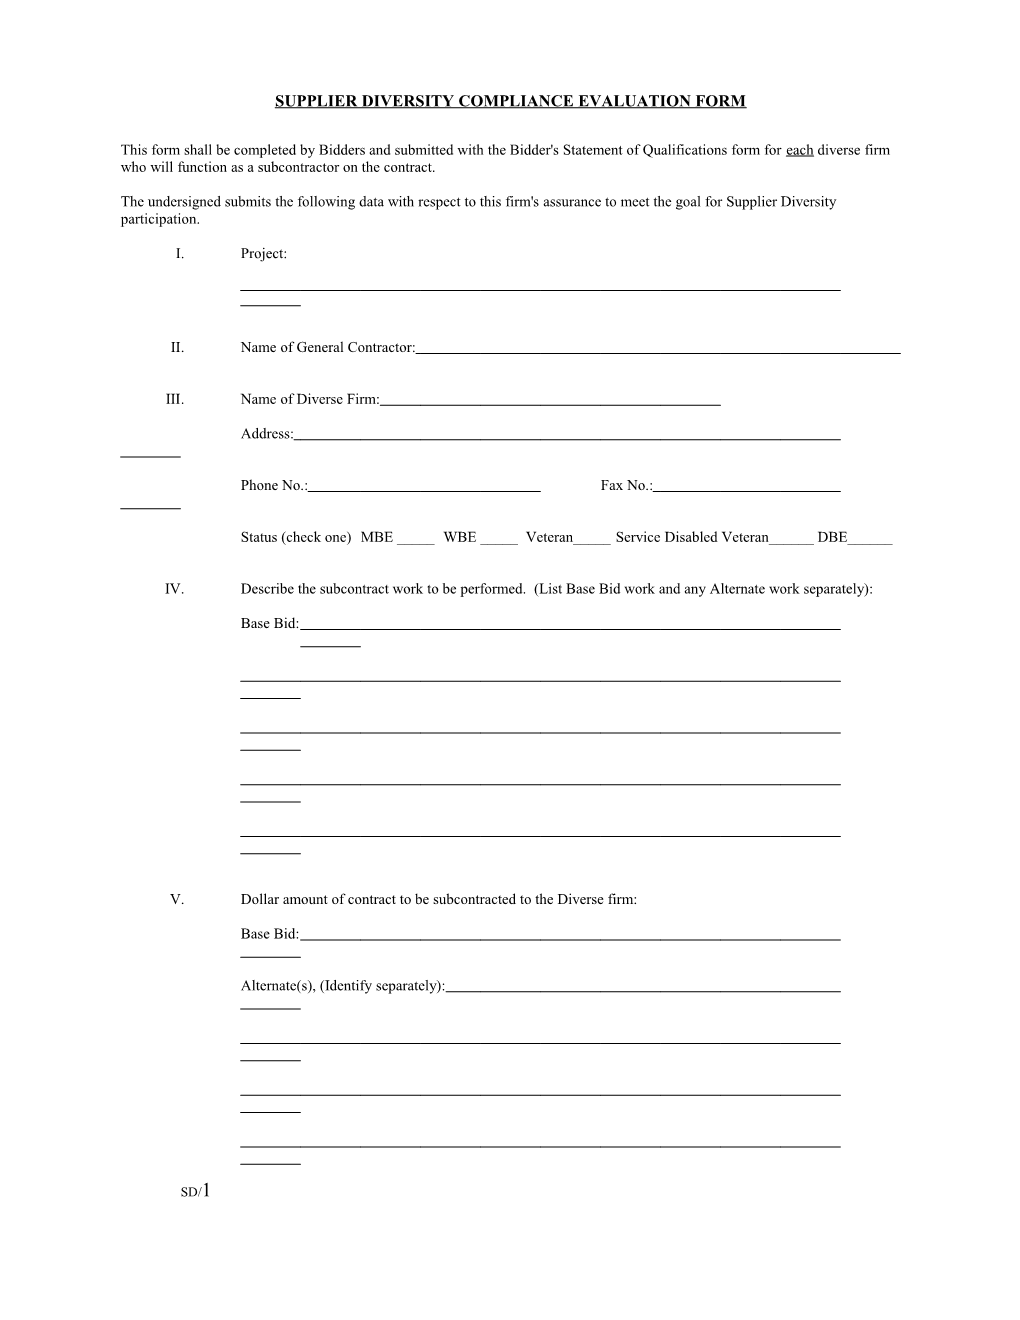 Mbe/Wbe Compliance Evaluation Form